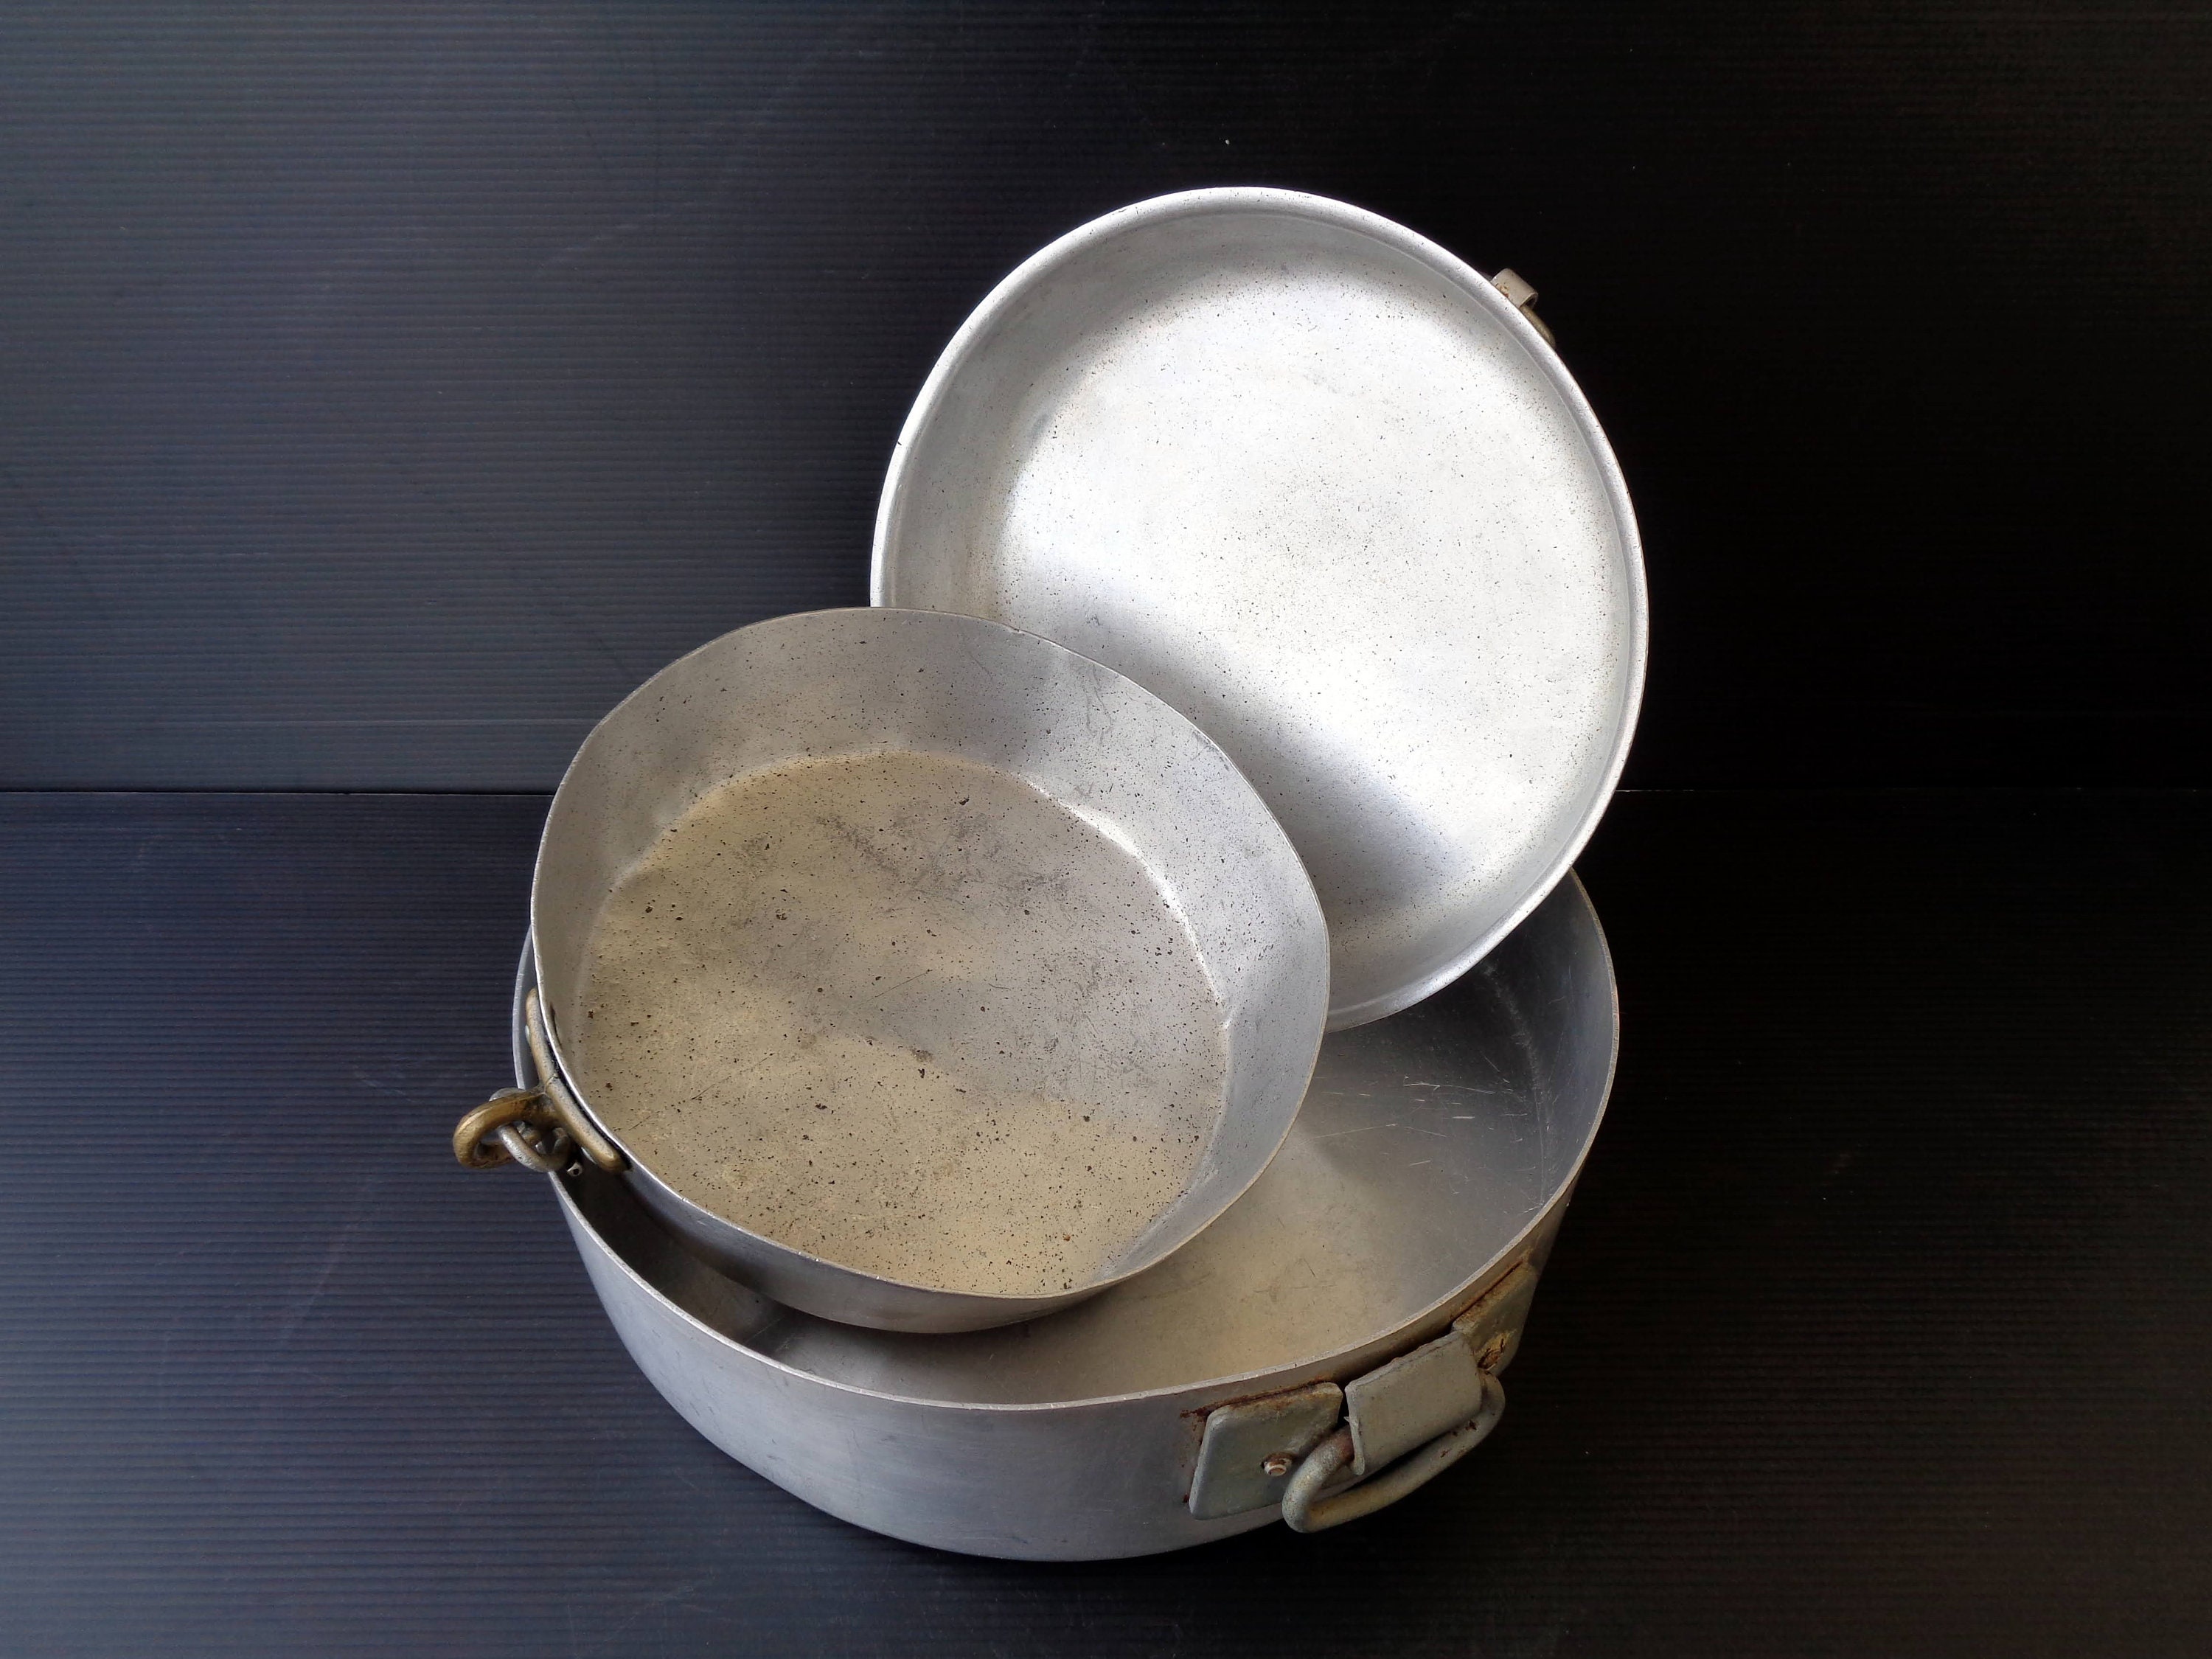 Bakeware from Armchair World - imported Italian paper baking pans